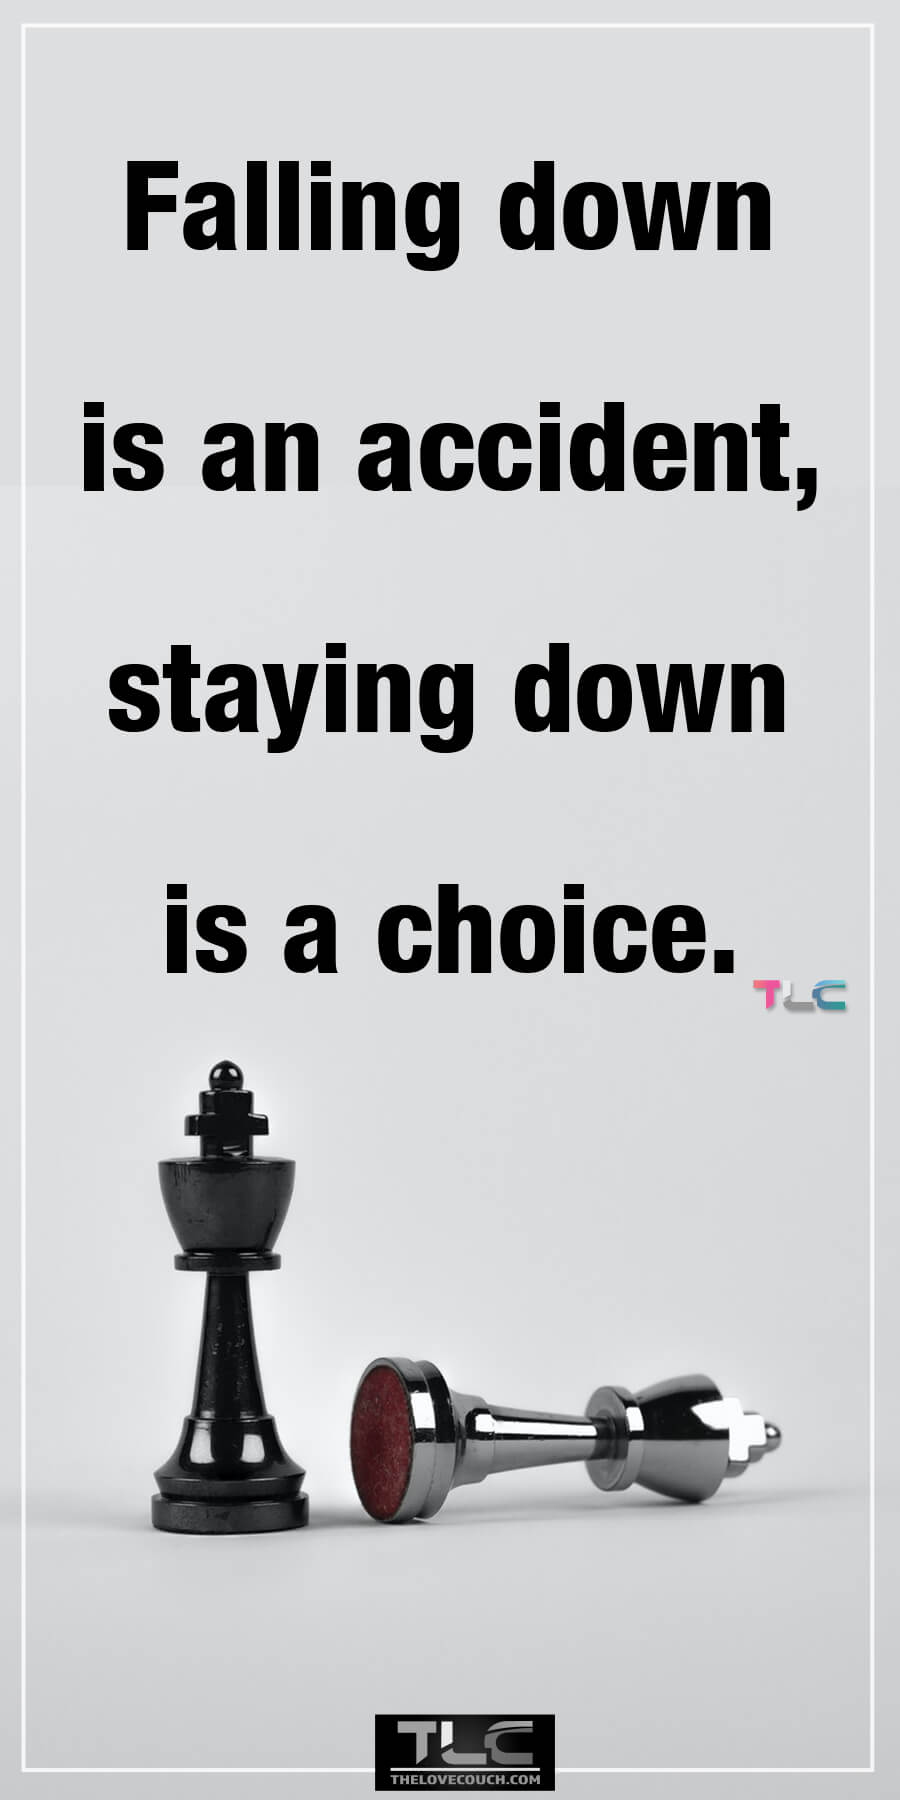 Falling down is an accident; staying down is a choice.